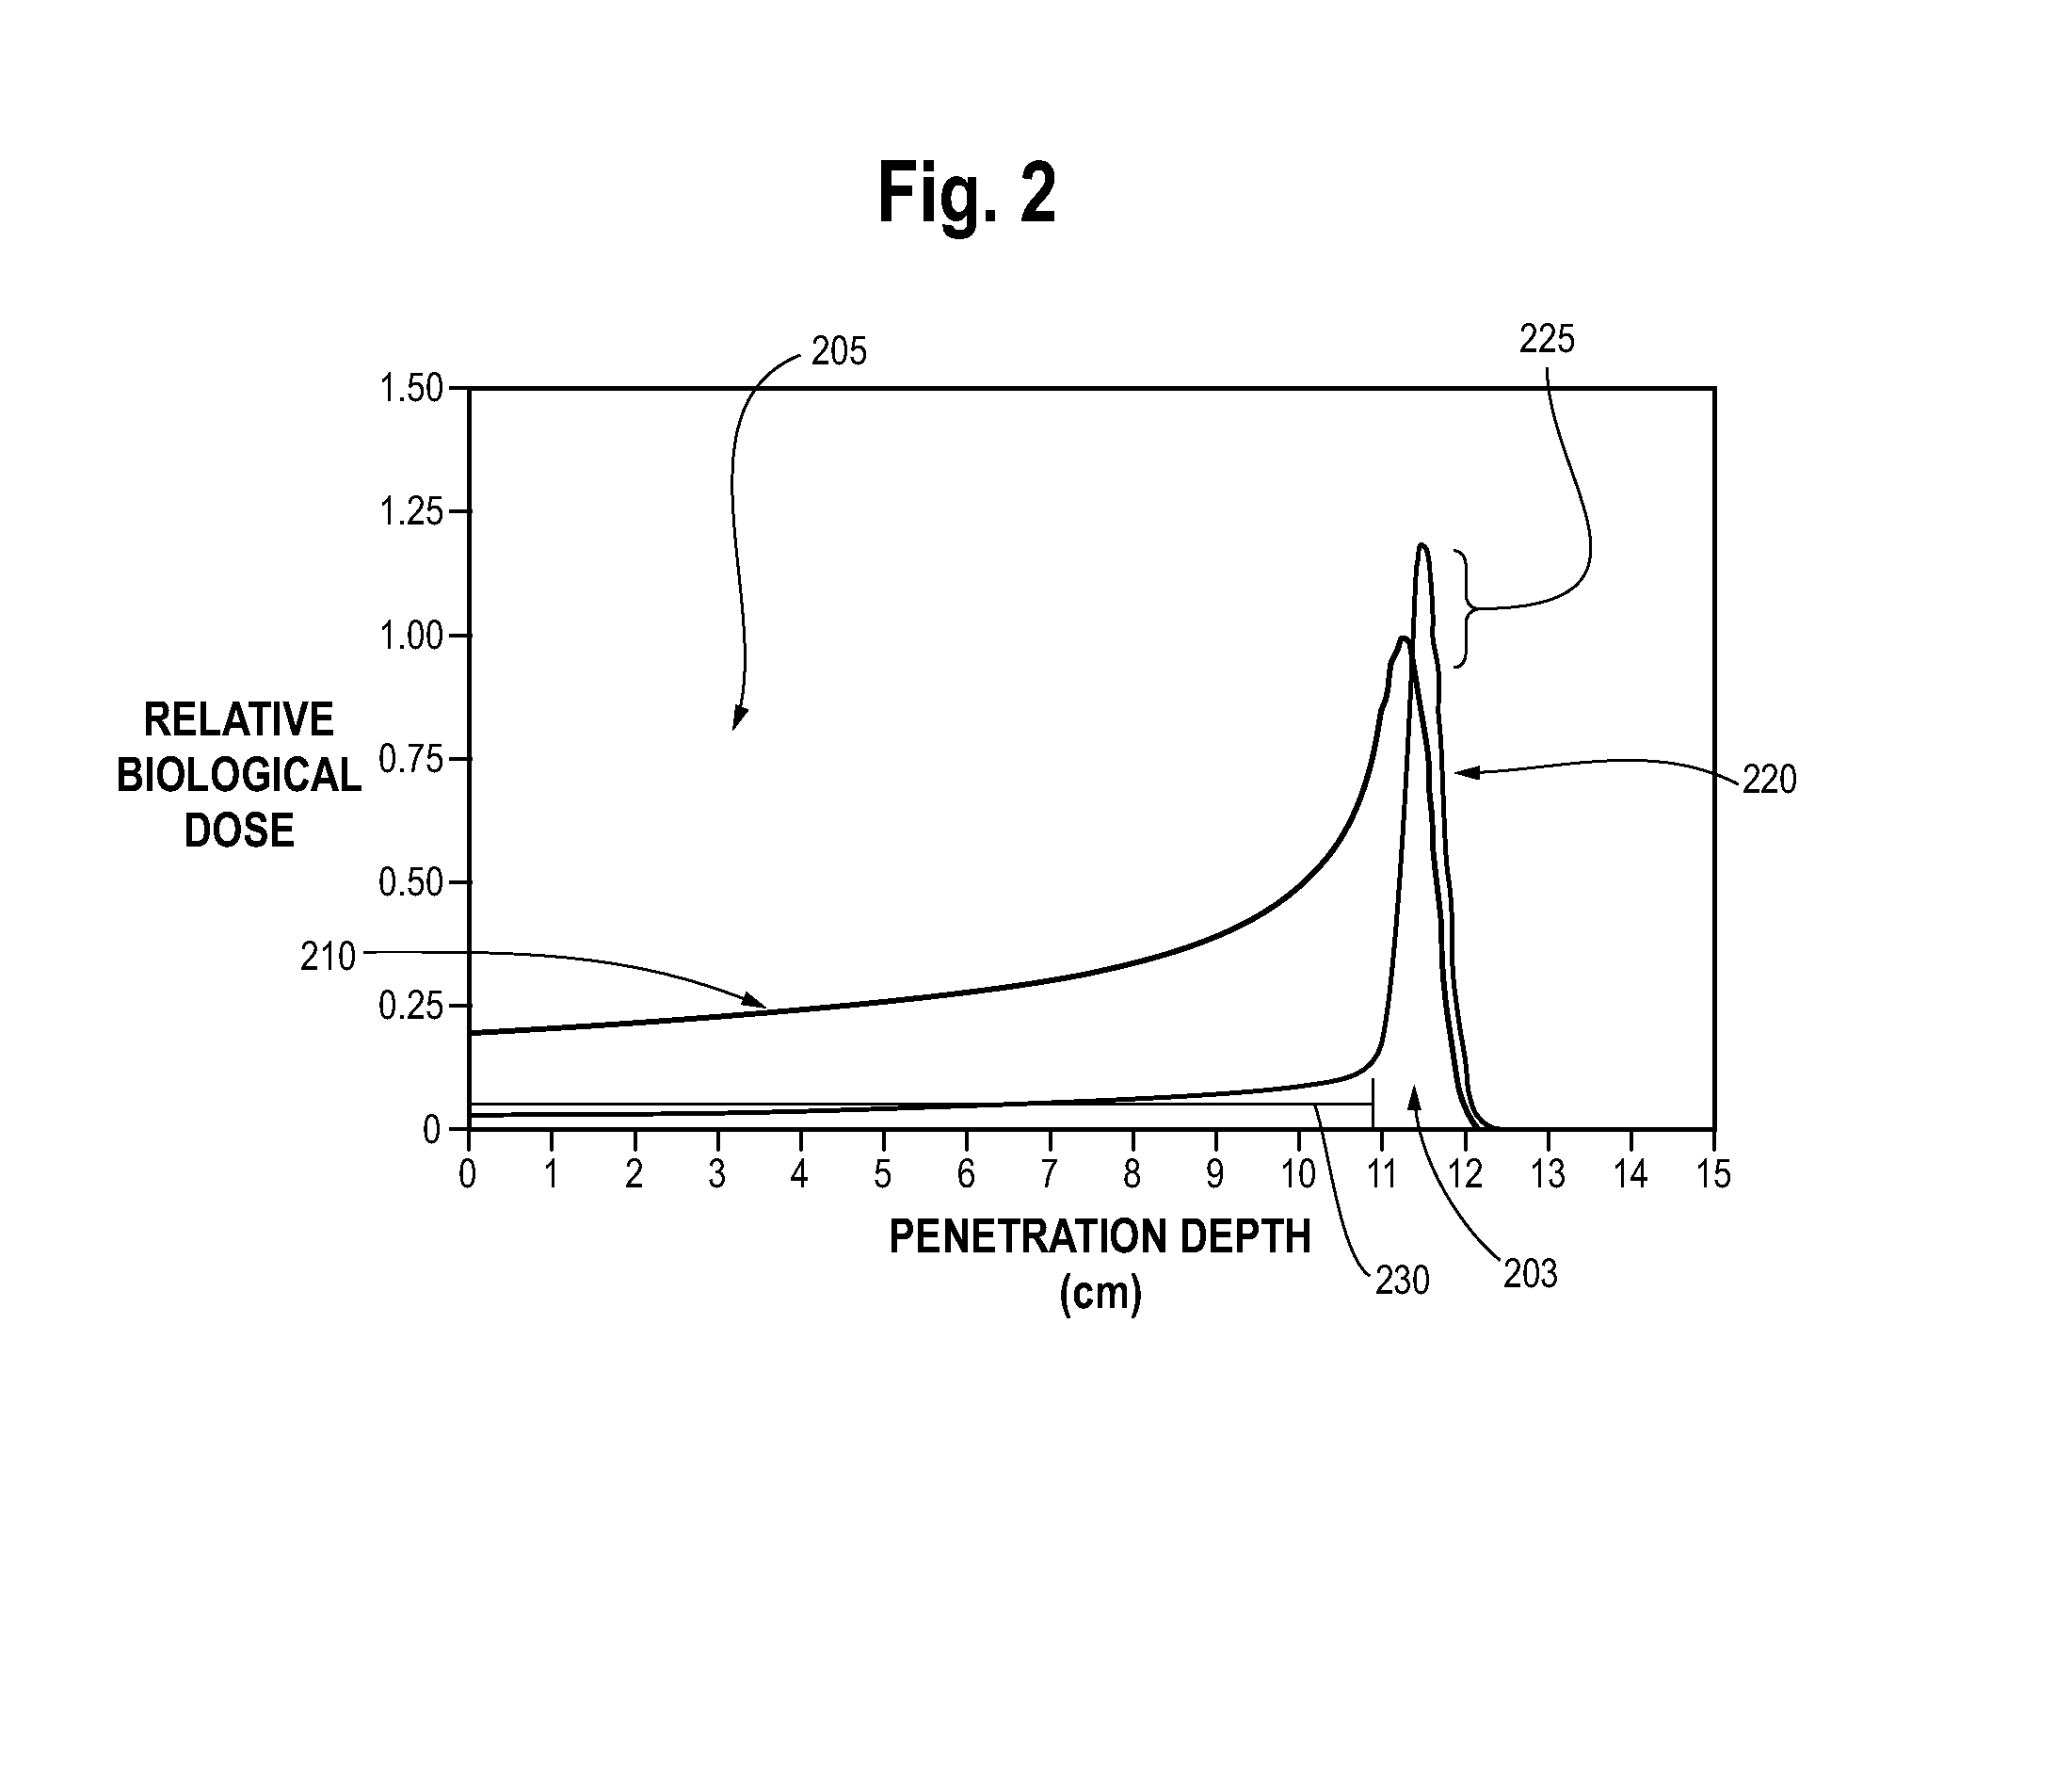 Antiproton production and delivery for imaging and termination of undesirable cells